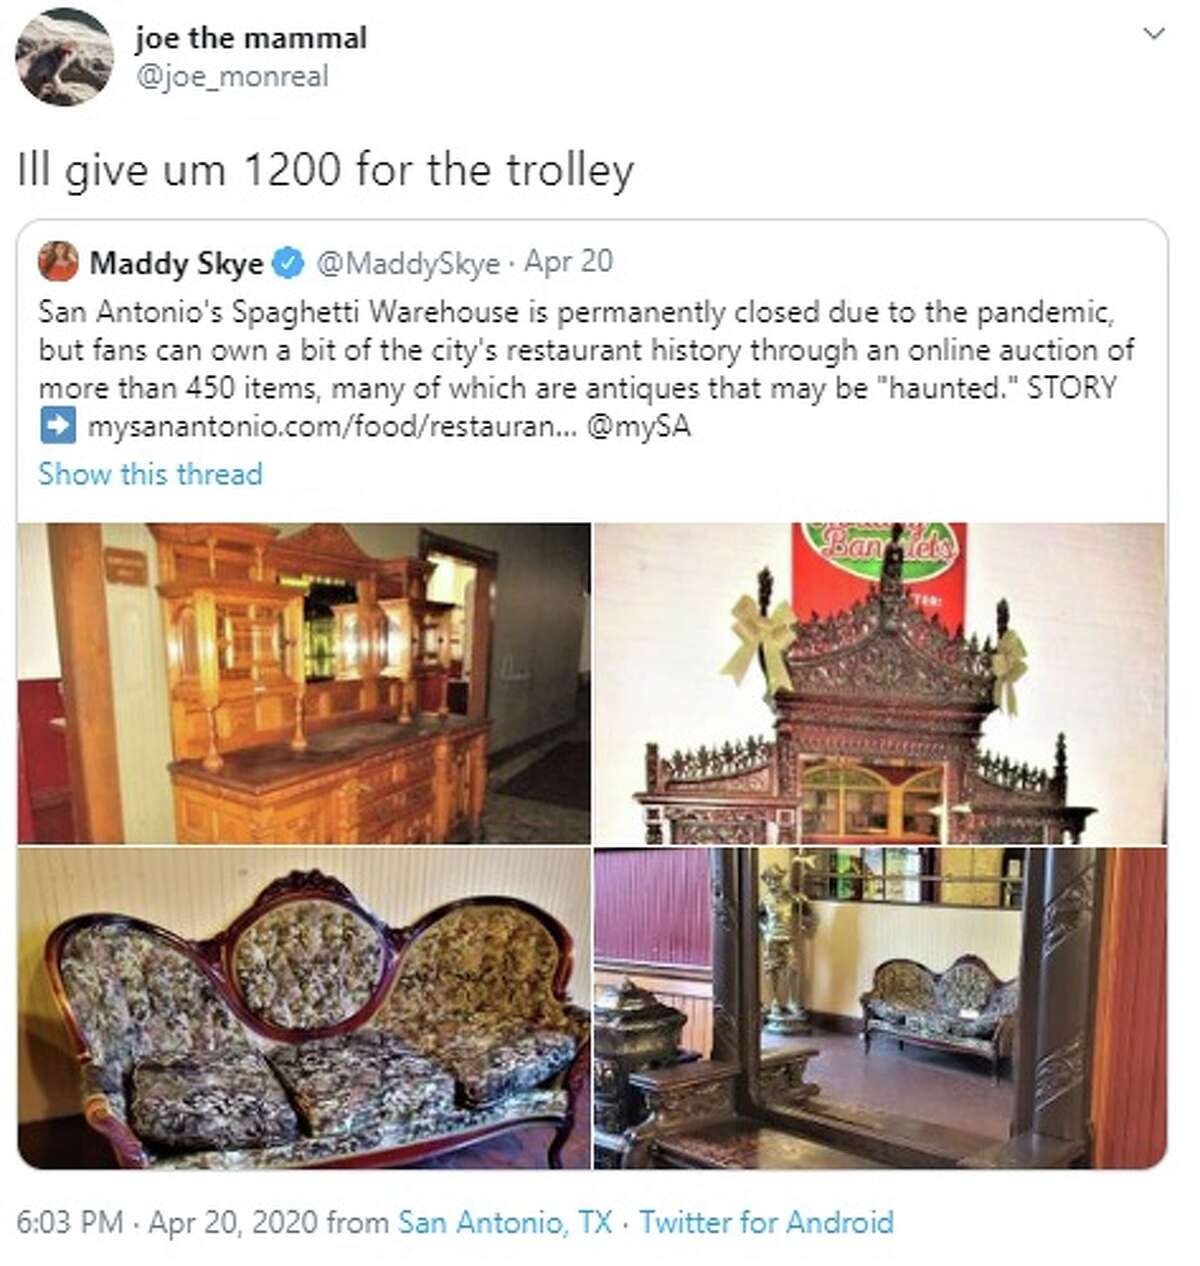 It's unclear if RCI South Texas Auctions is exploring the option. Oz was not immediately available to comment on what will become of the trolley. The online auction ends May 3 at 7:3o p.m.  RCI Auctions will host an onsite preview day to allow bidders a chance to inspect the items in person from 11 a.m. to 2 p.m. May 1-2. The auctioneer said online that both the preview event and item pickup process will adhere to social distancing guidelines. Arranging appointments is encouraged by calling 210-264-4176.